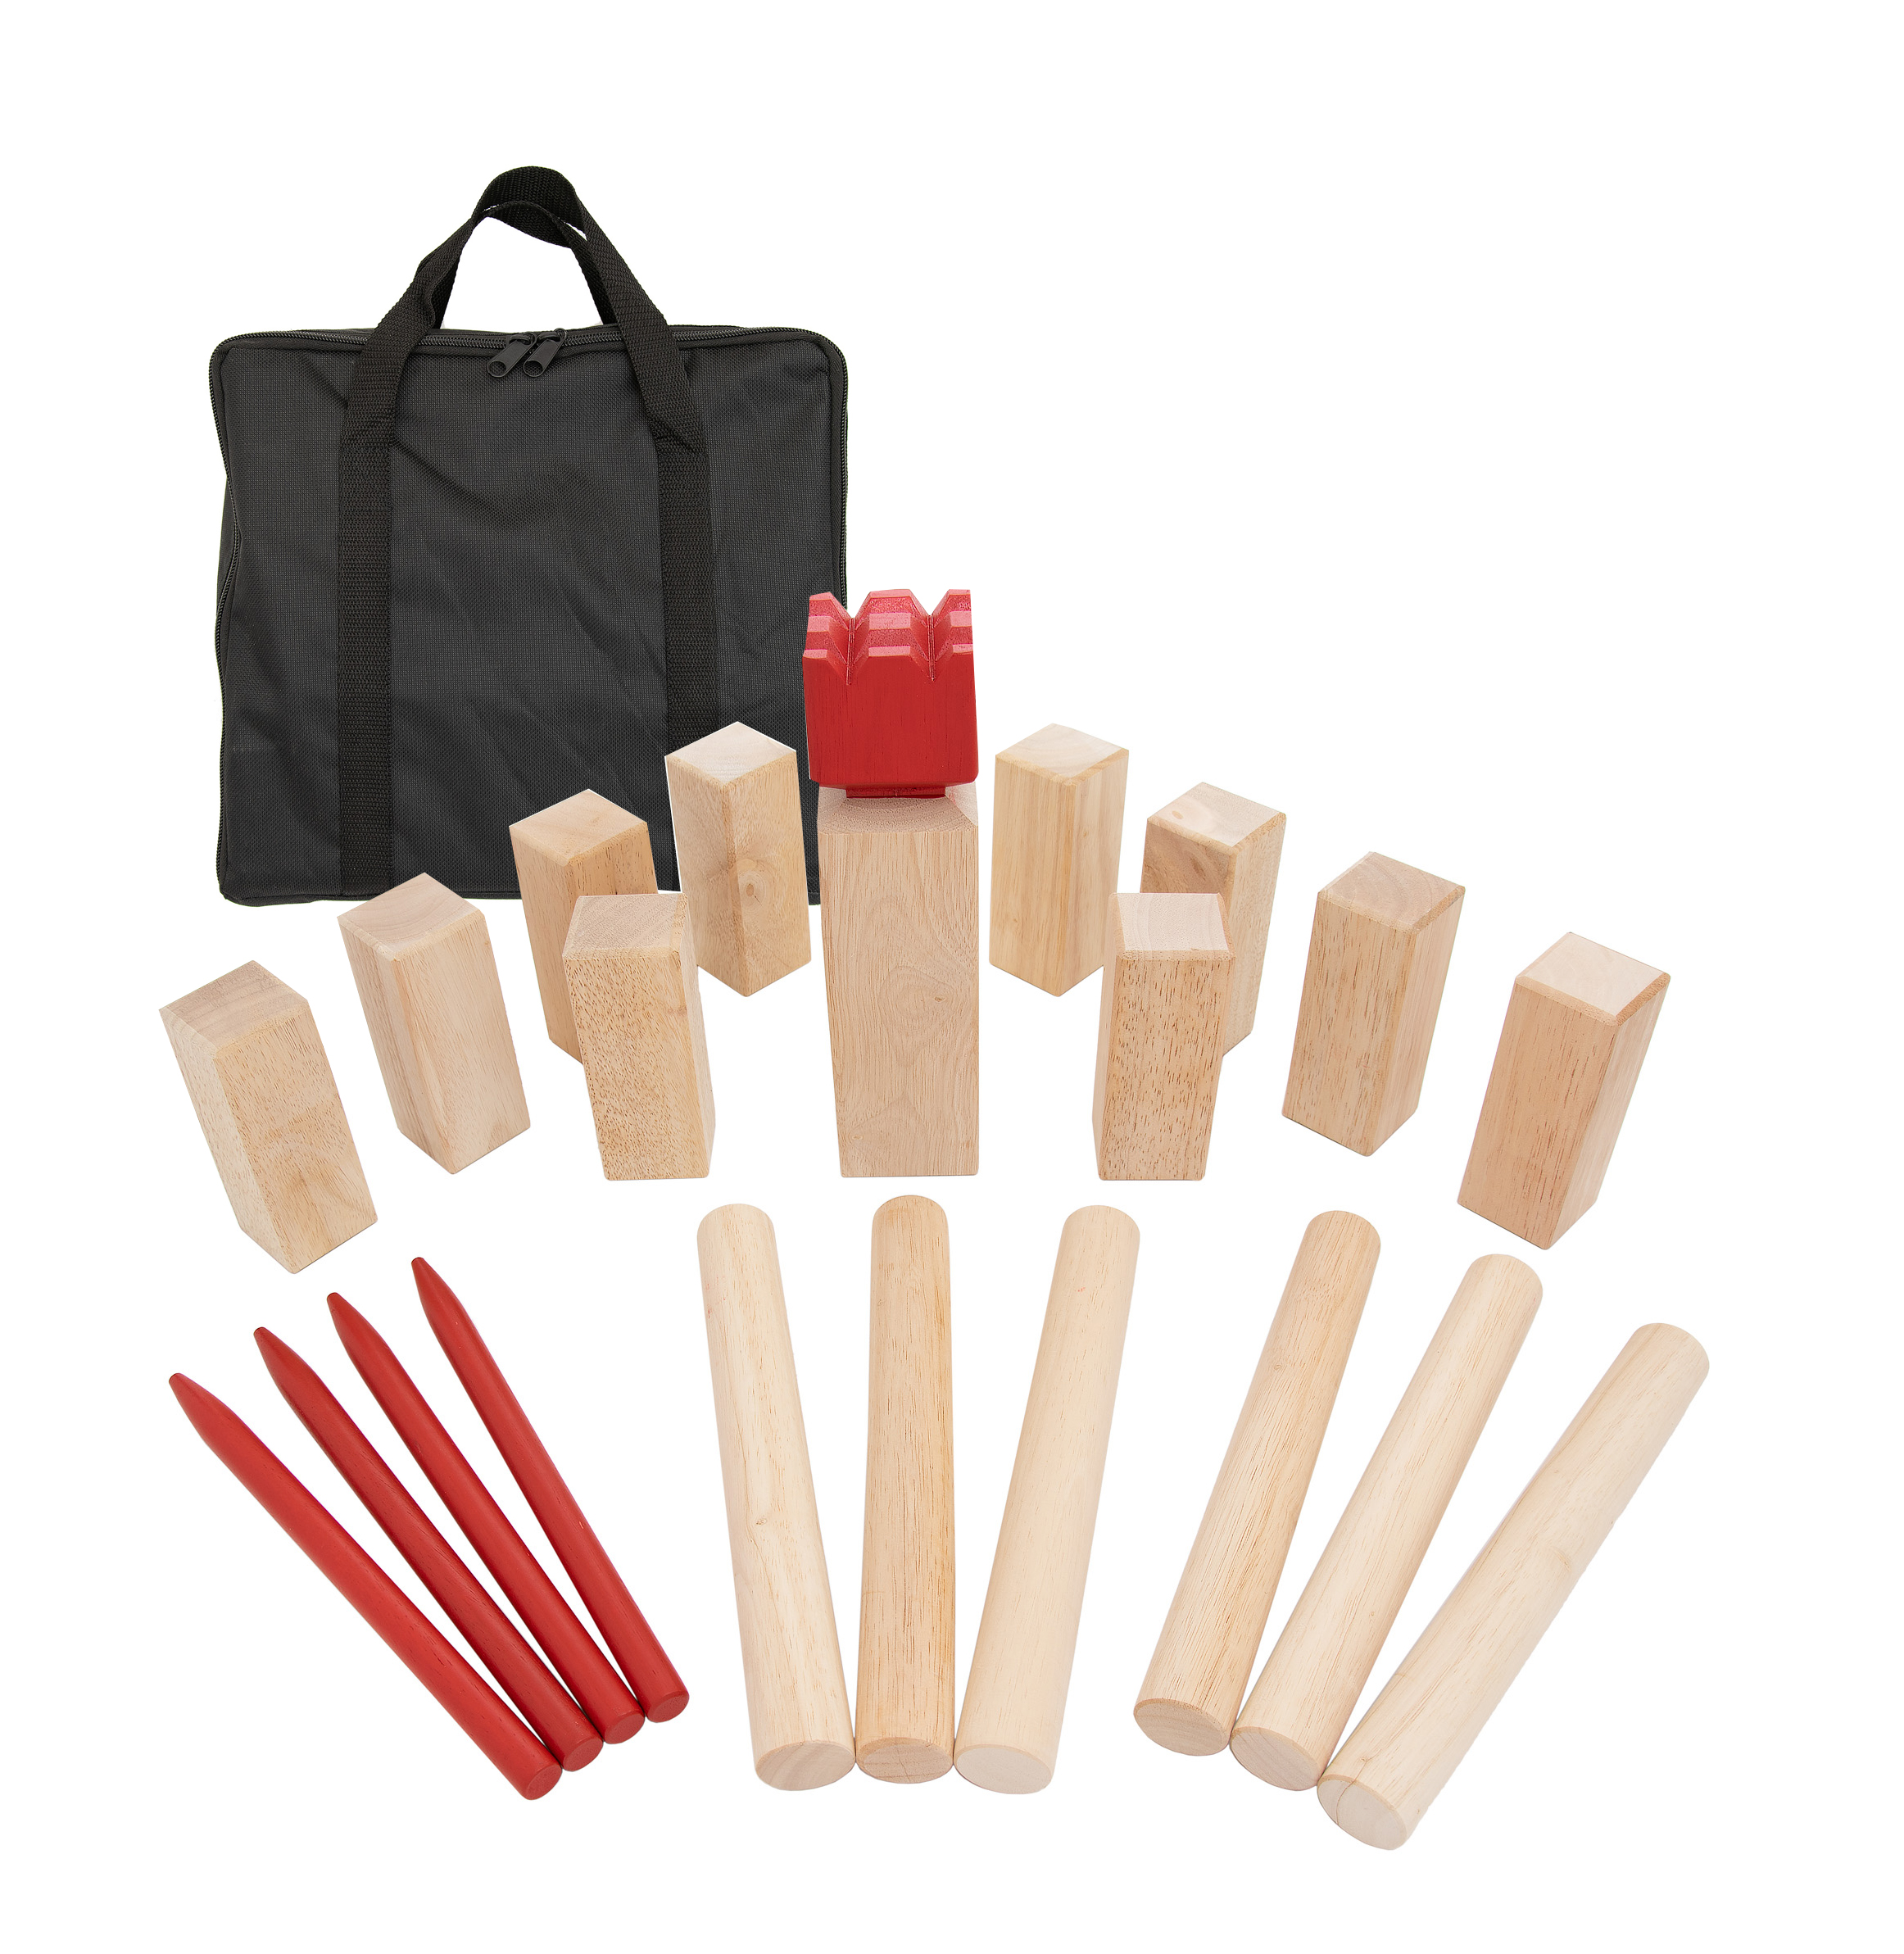 Hardwood Kubb Viking Game in a Handy Carry Bag from Big Game Hunters 